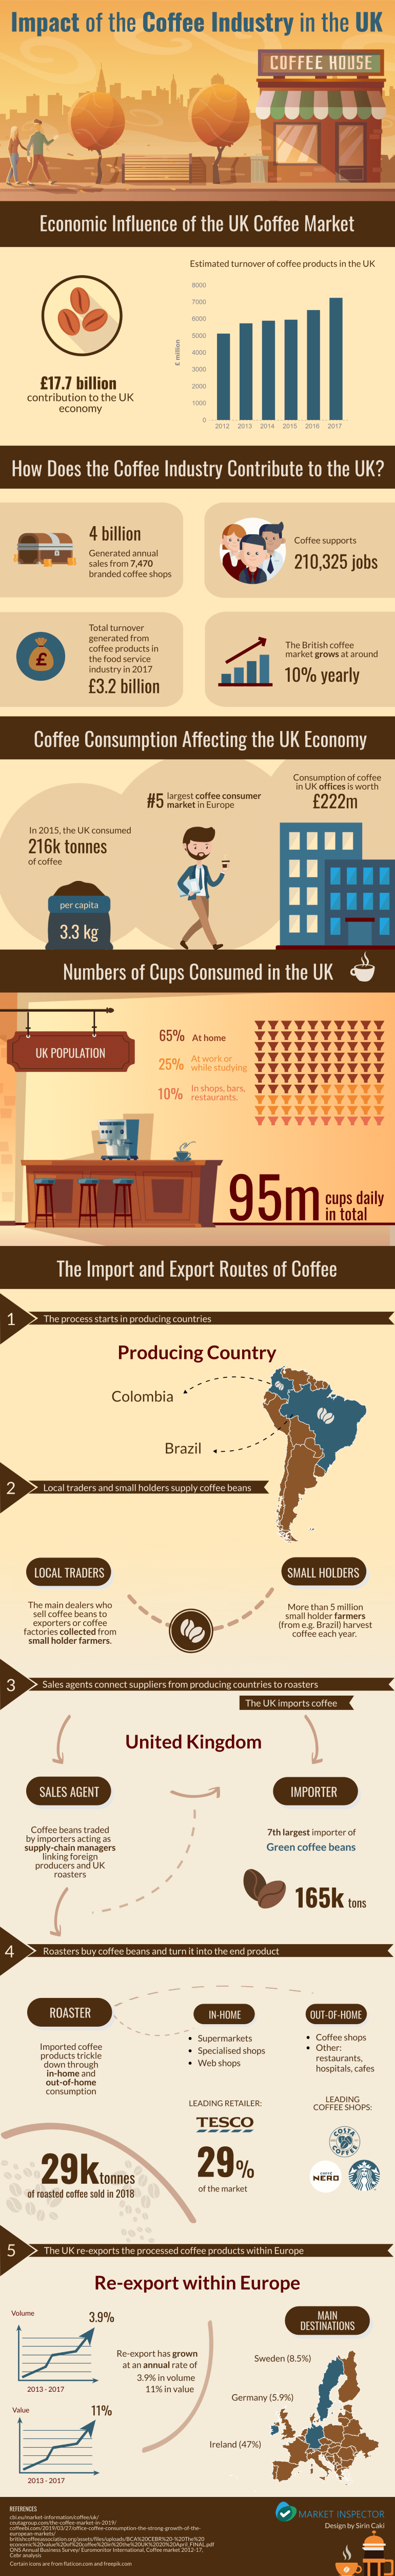 Impact of the Coffee Industry in the UK